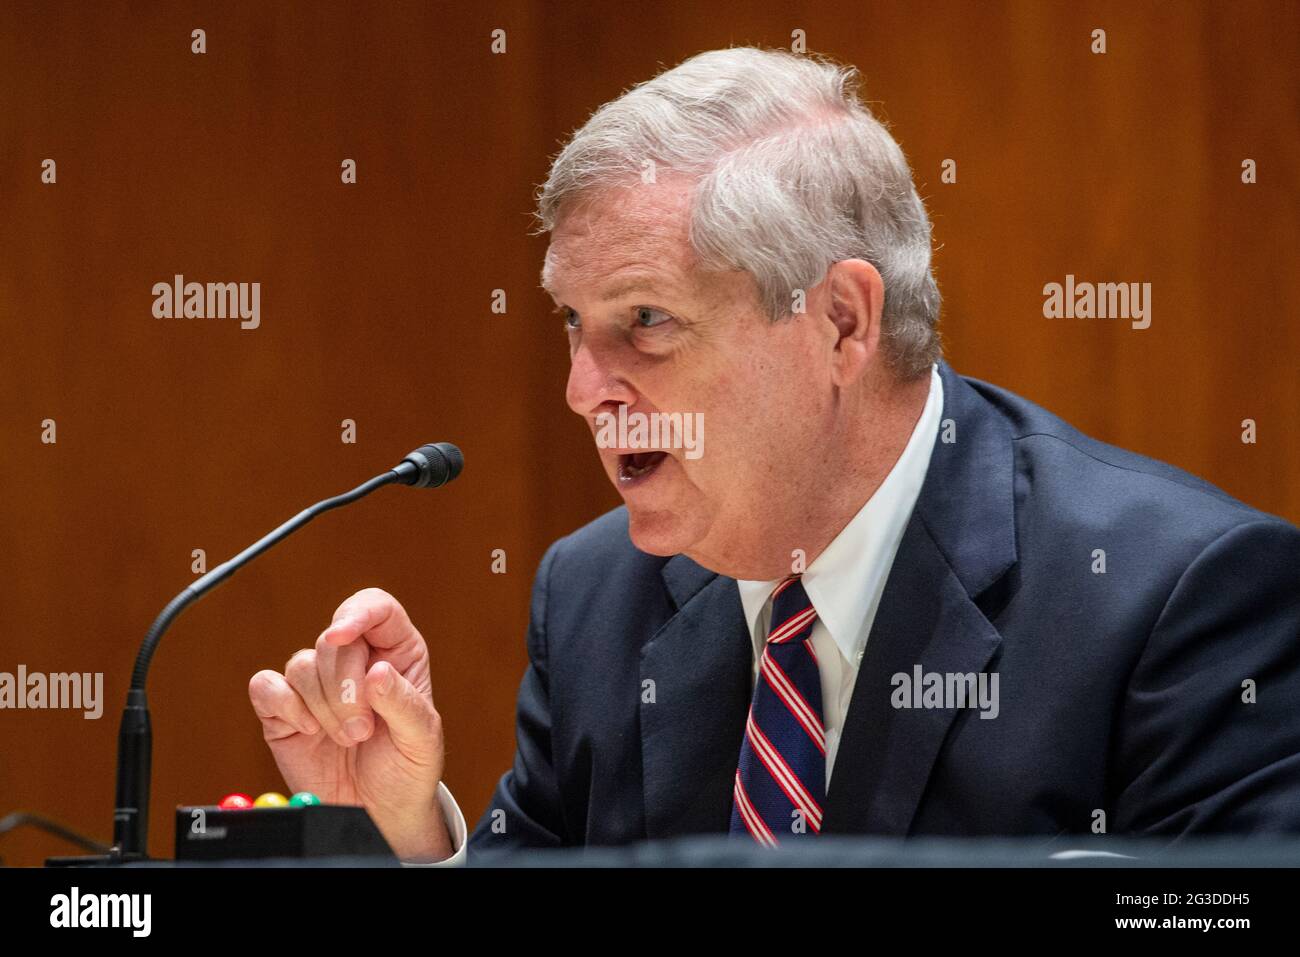 U.S. Department of Agriculture Secretary Tom Vilsack appears before a Senate Committee on Appropriations - Subcommittee on Agriculture, Rural Development, Food and Drug Administration, and Related Agencies hearing to examine proposed budget estimates and justification for fiscal year 2022 for the Department of Agriculture, in the Dirksen Senate Office Building in Washington, DC, Tuesday, June 15, 2021. Credit: Rod Lamkey/CNP /MediaPunch Stock Photo